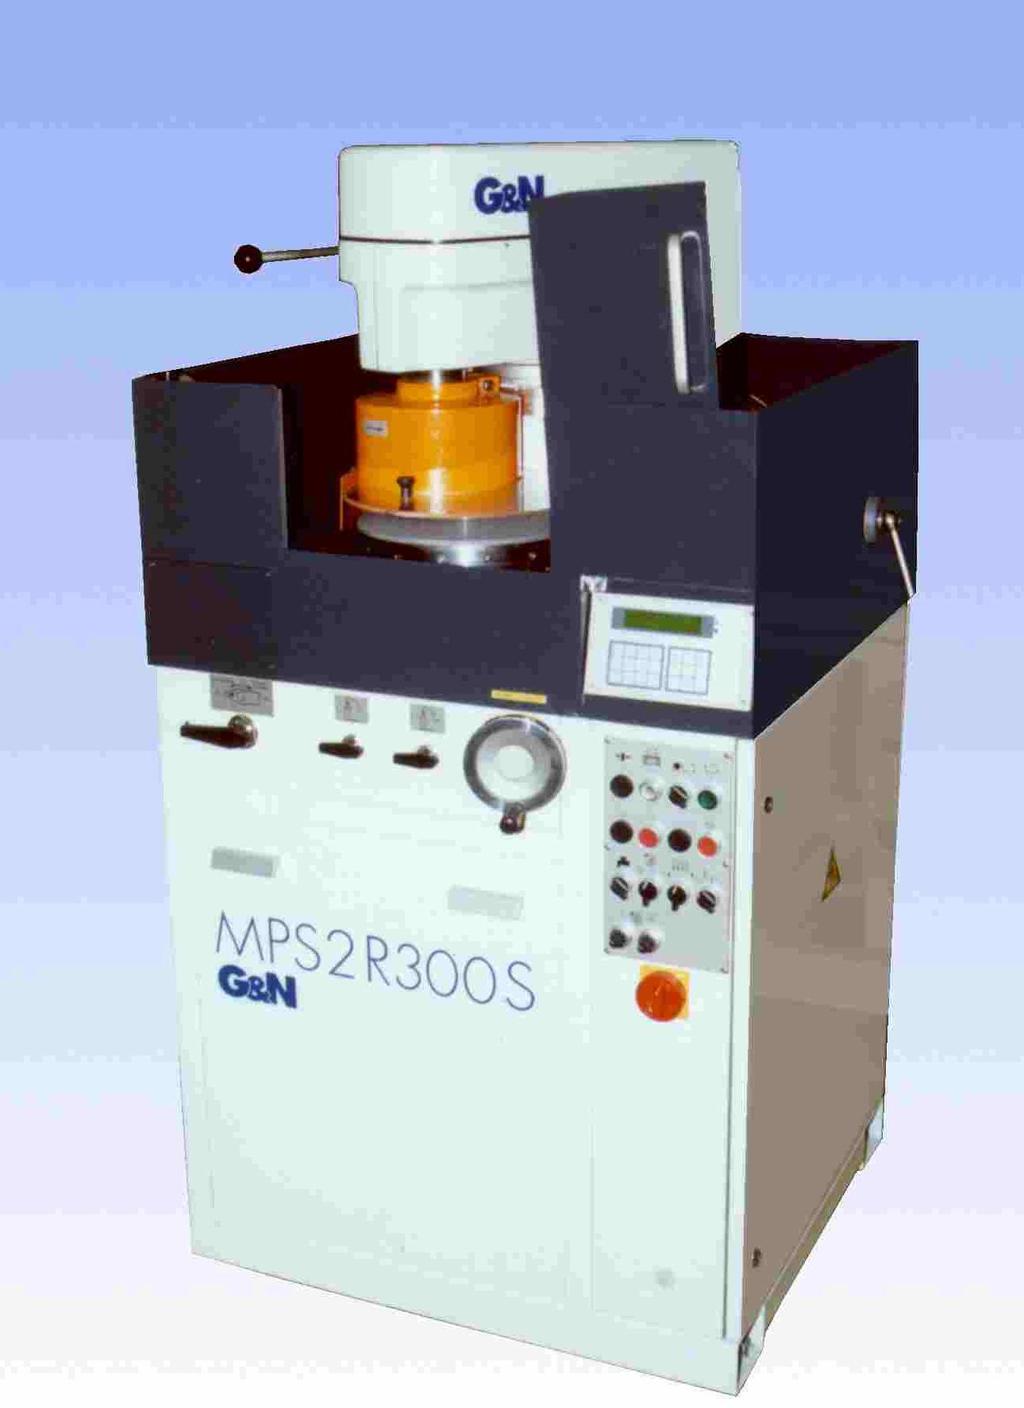 Ideal for the high demands of grinding electronic materials